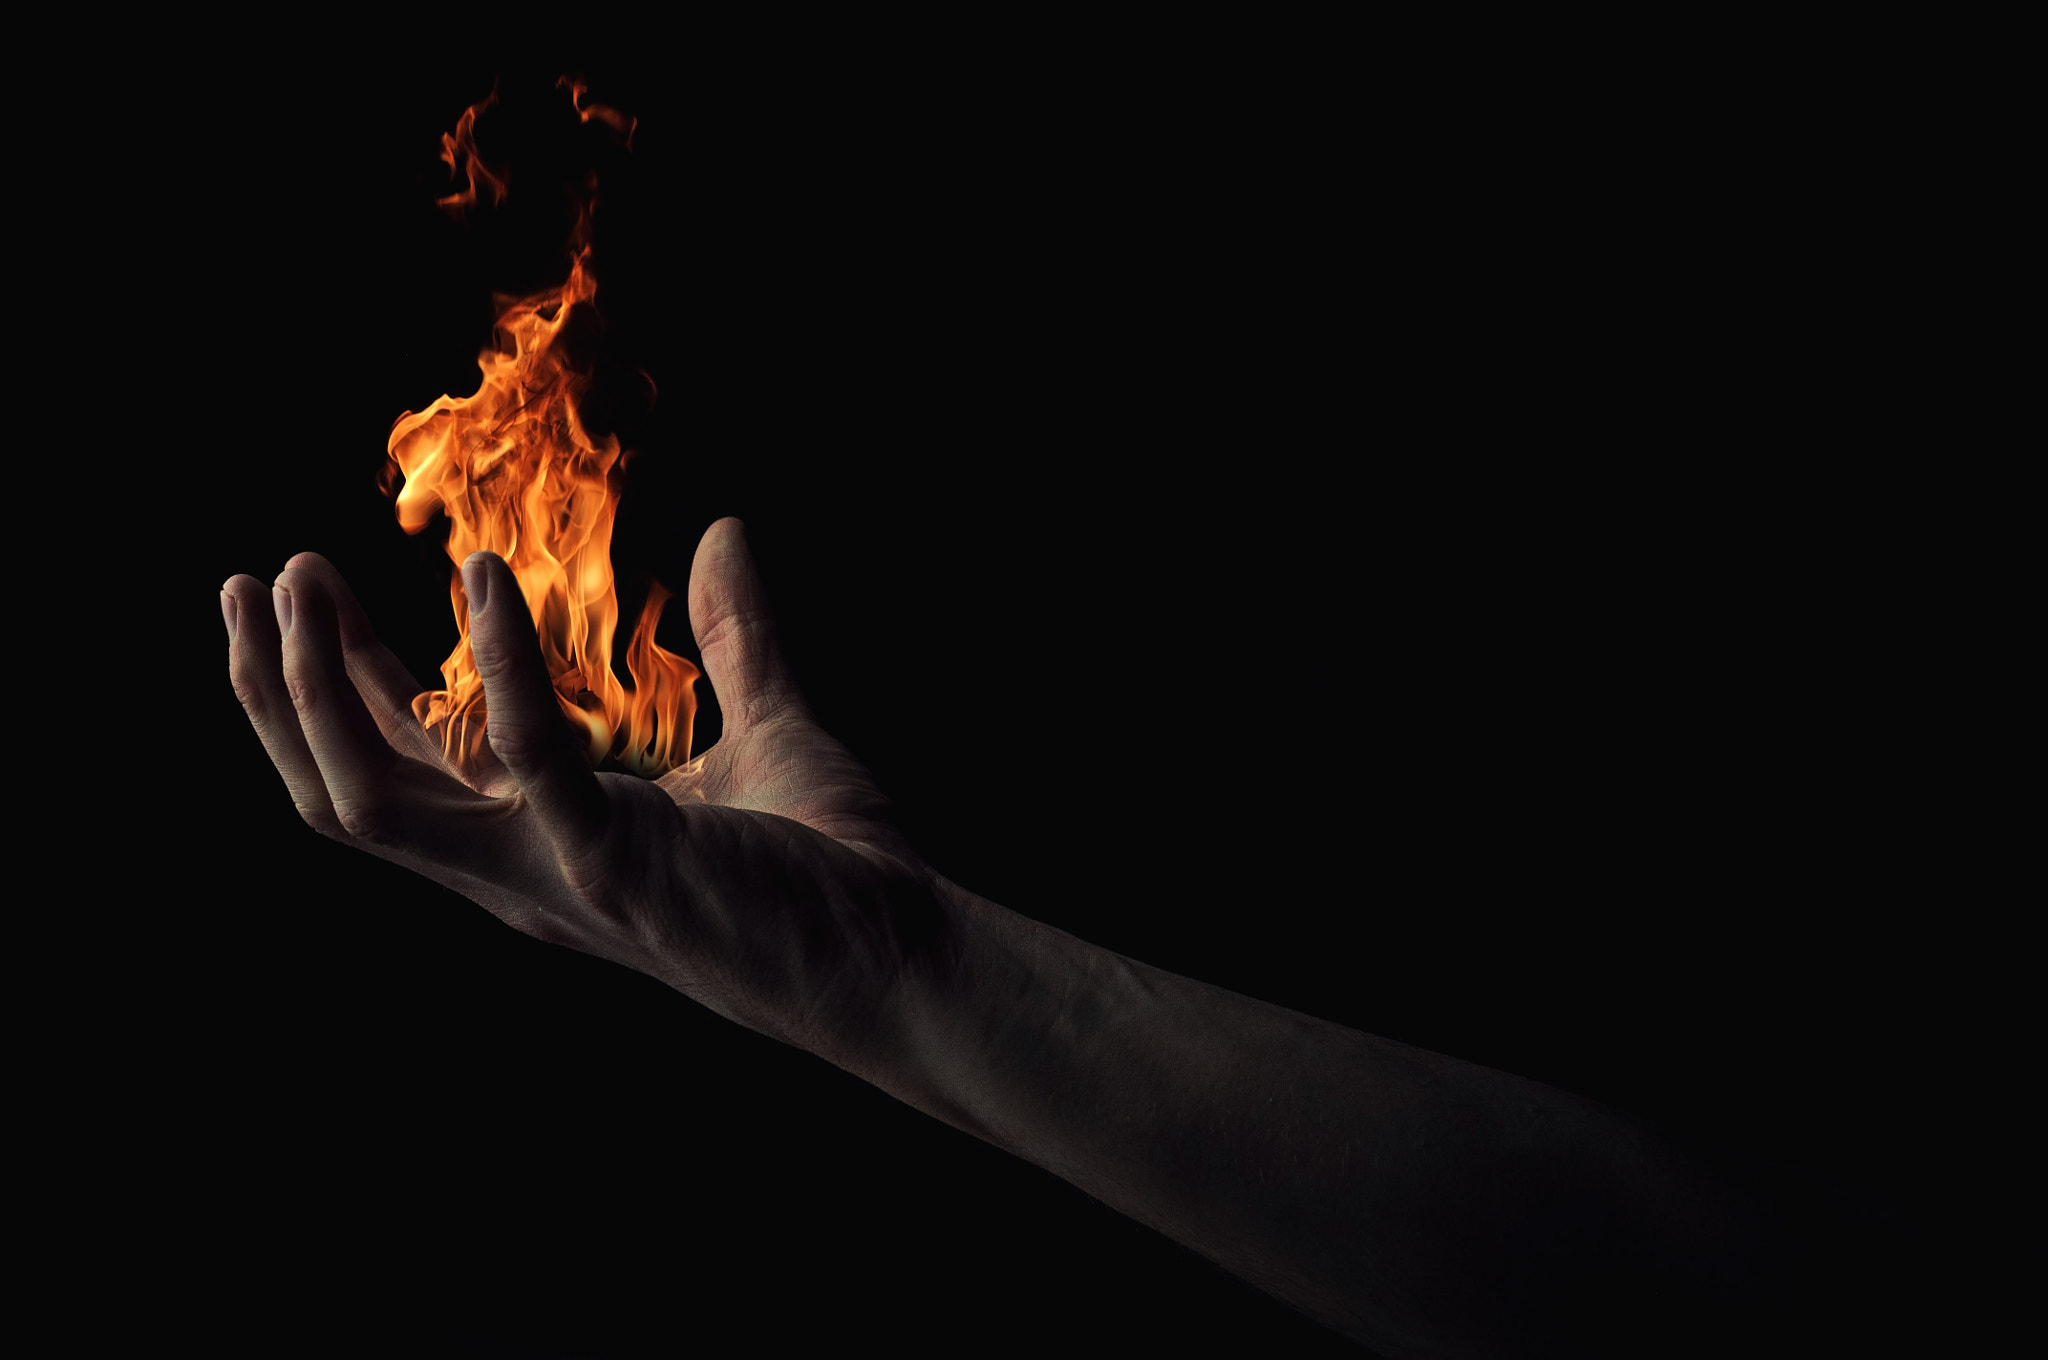 Nikon D90 sample photo. Why you hide flames, between your fingers? photography